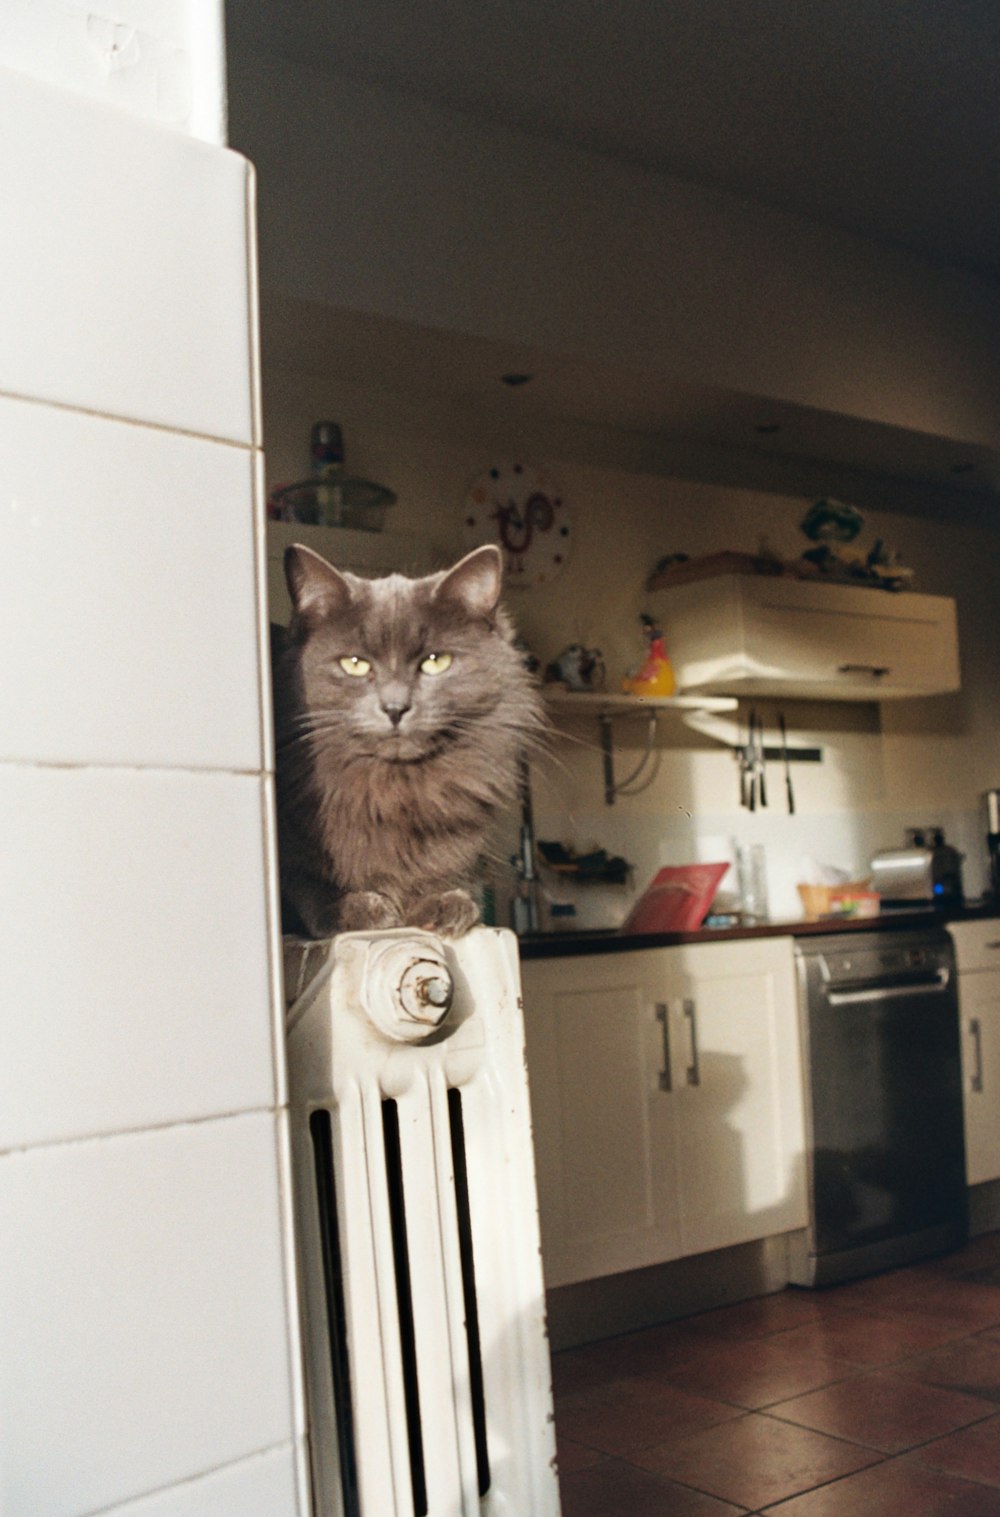 a cat sitting on top of a radiator in a kitchen